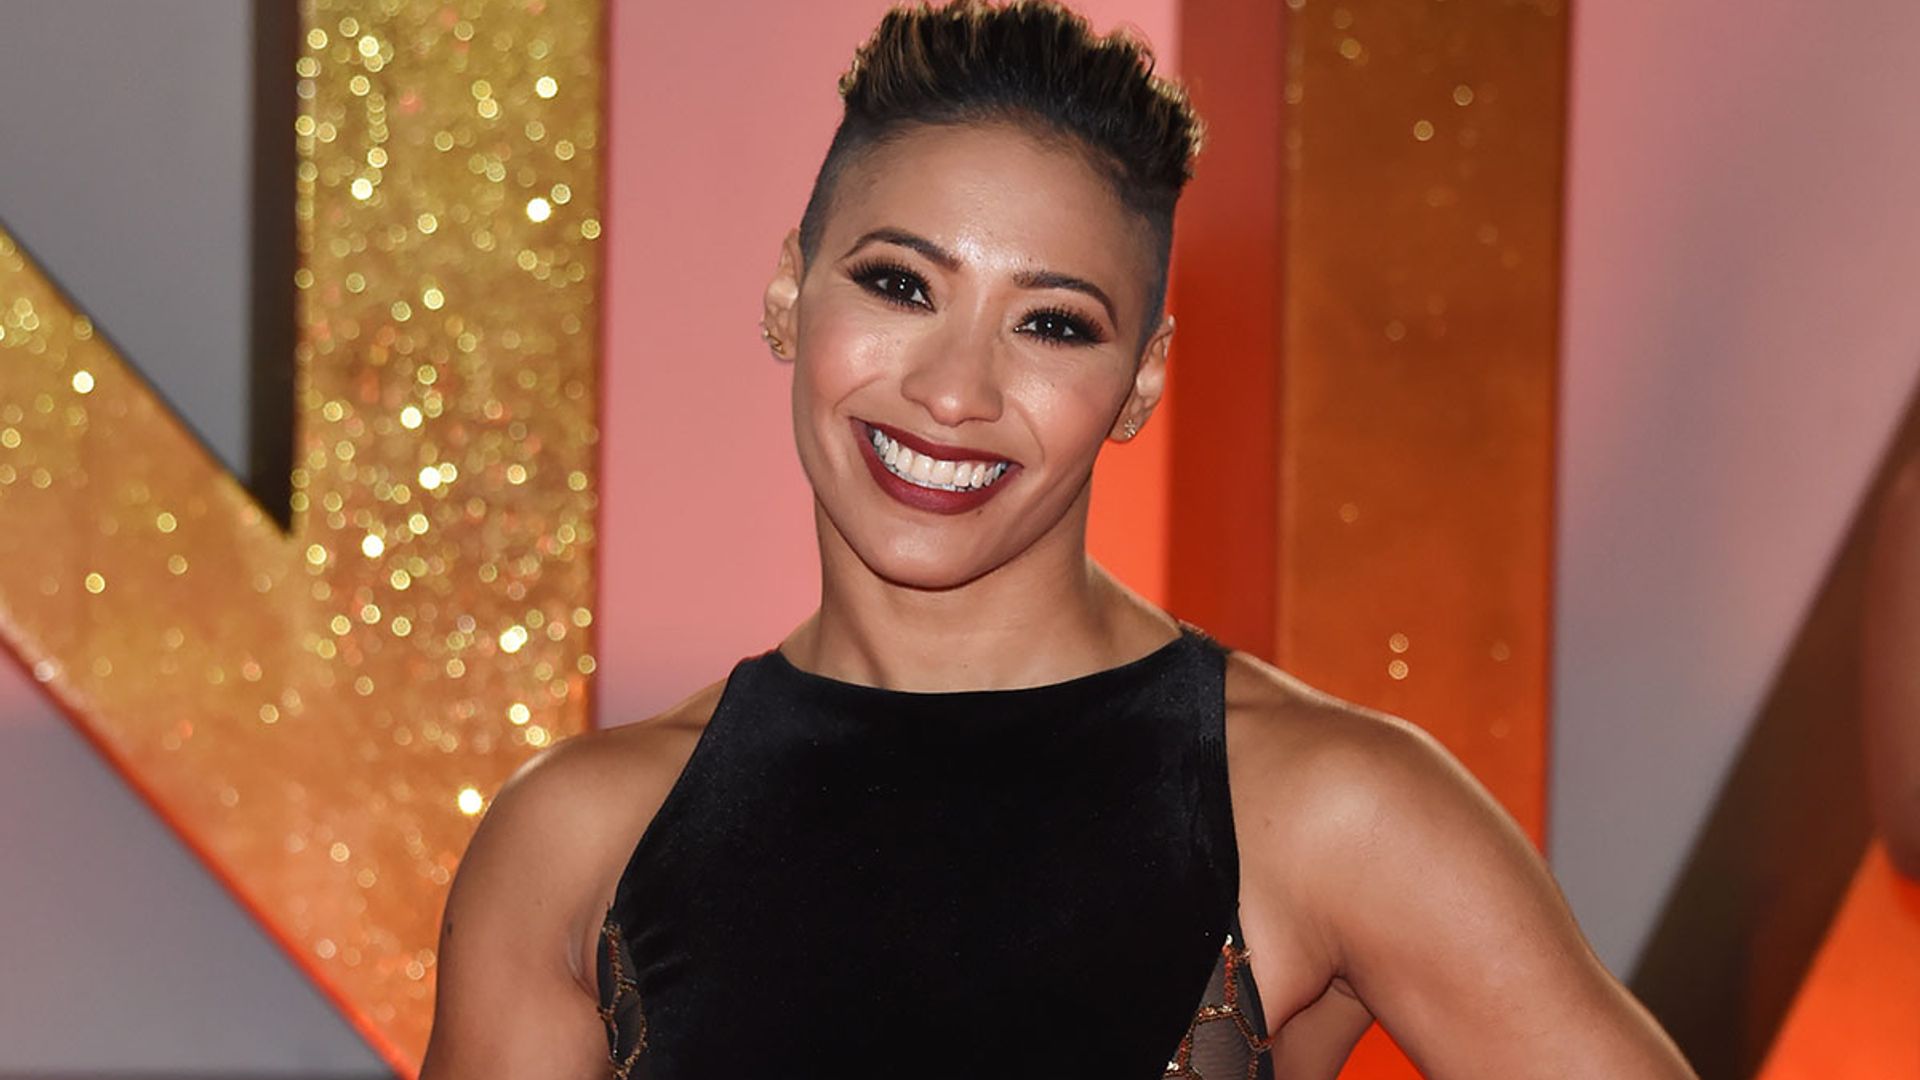 Strictly's Karen Clifton shows off fabulous physique during pampering session with Janette Manrara